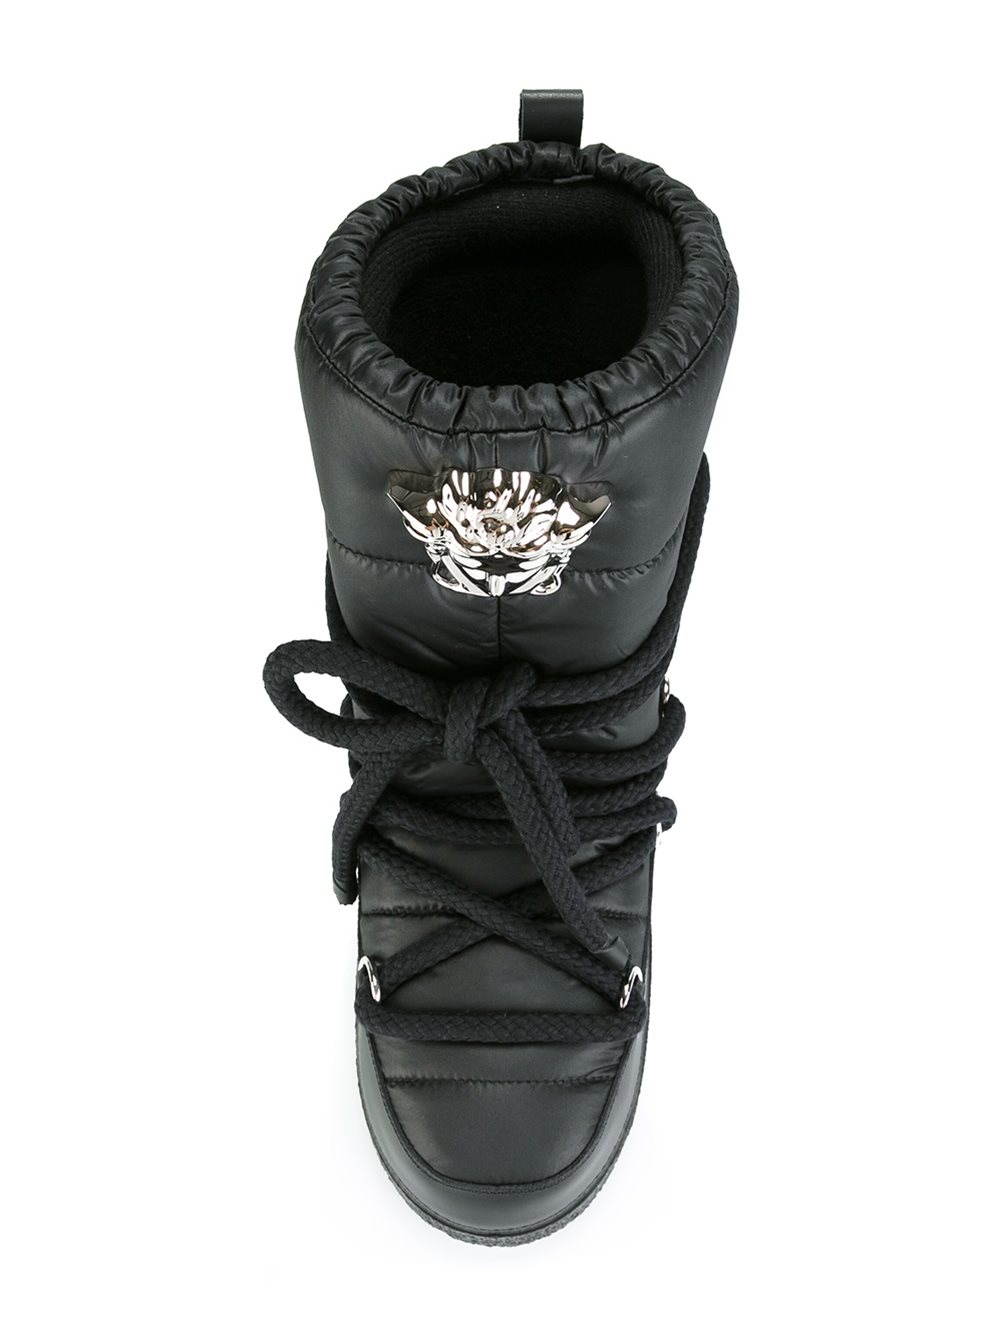 Versace Leather 'palazzo' Snow Boots in Black for Men - Lyst